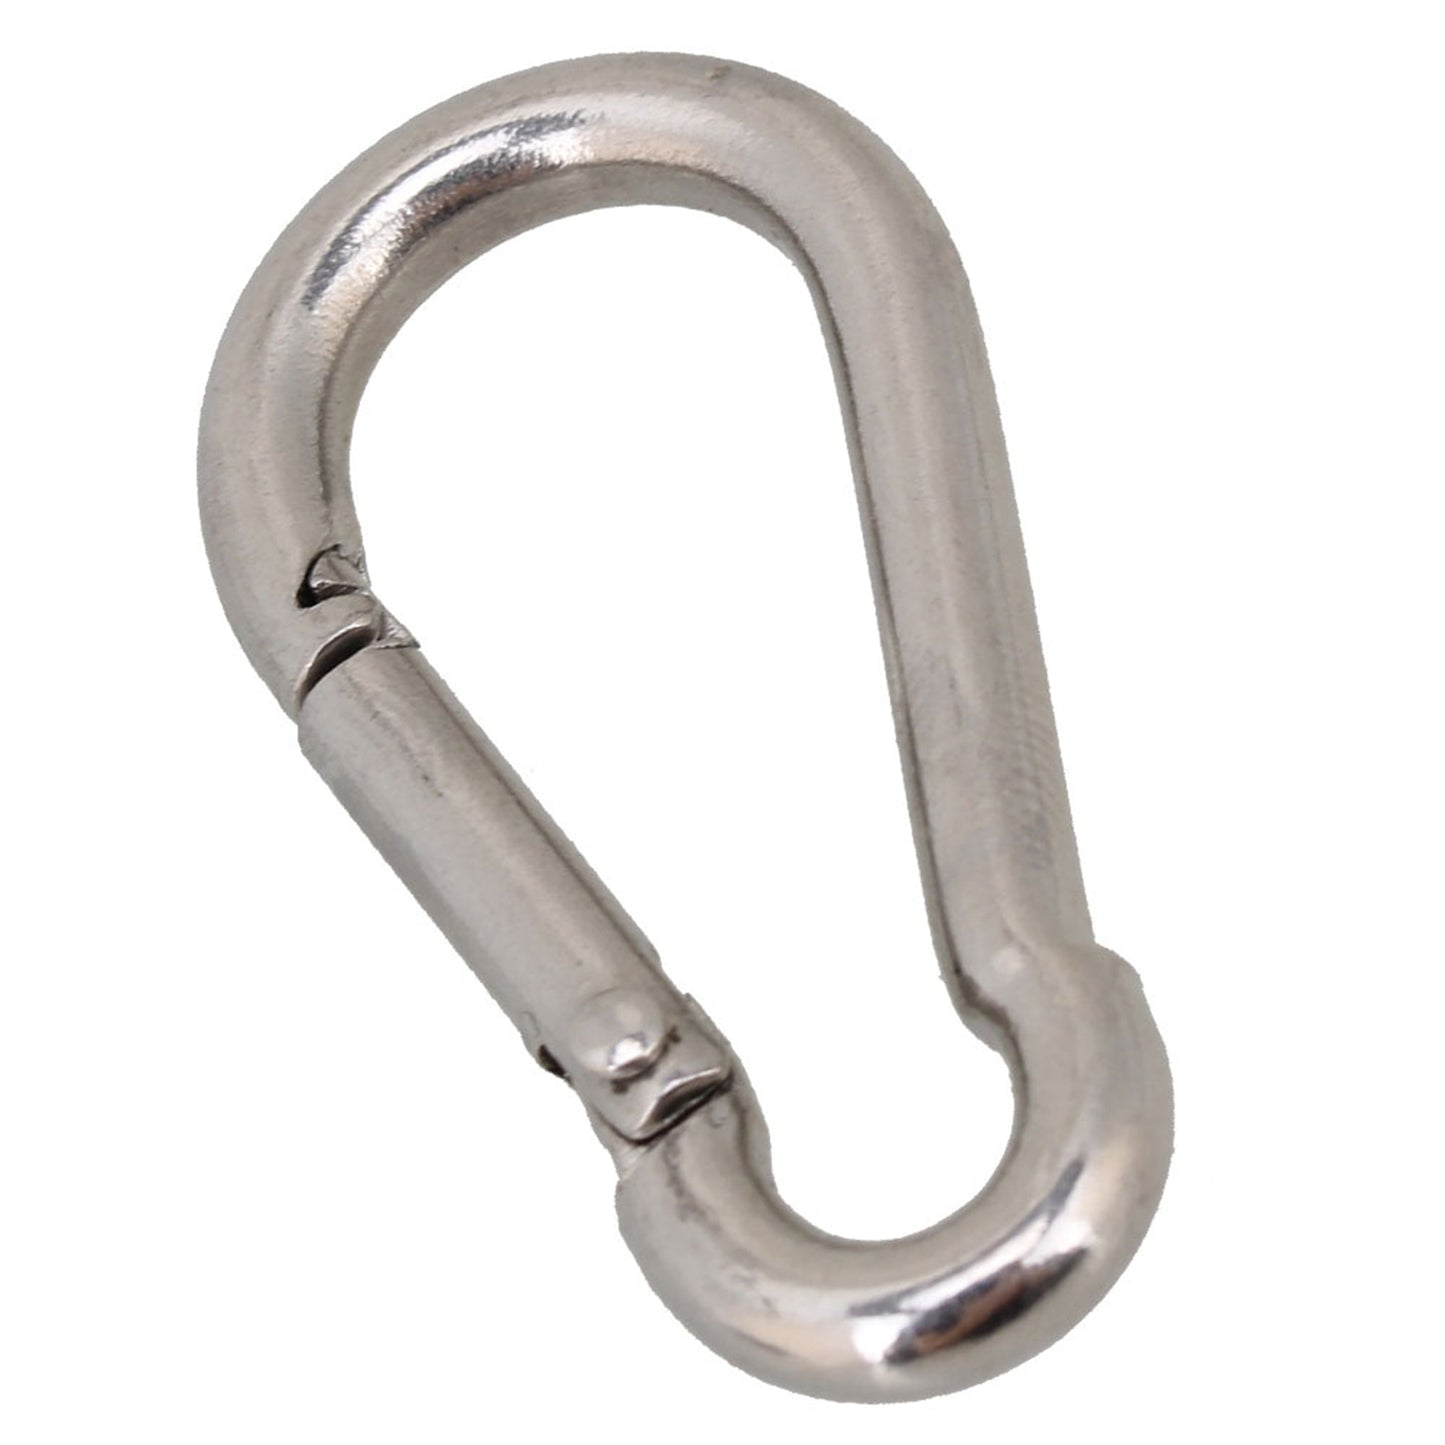 BQLZR 40x19.5x5.6mm Stainless Steel Spring Snap Hook for Wire Rope Link Pack of 10